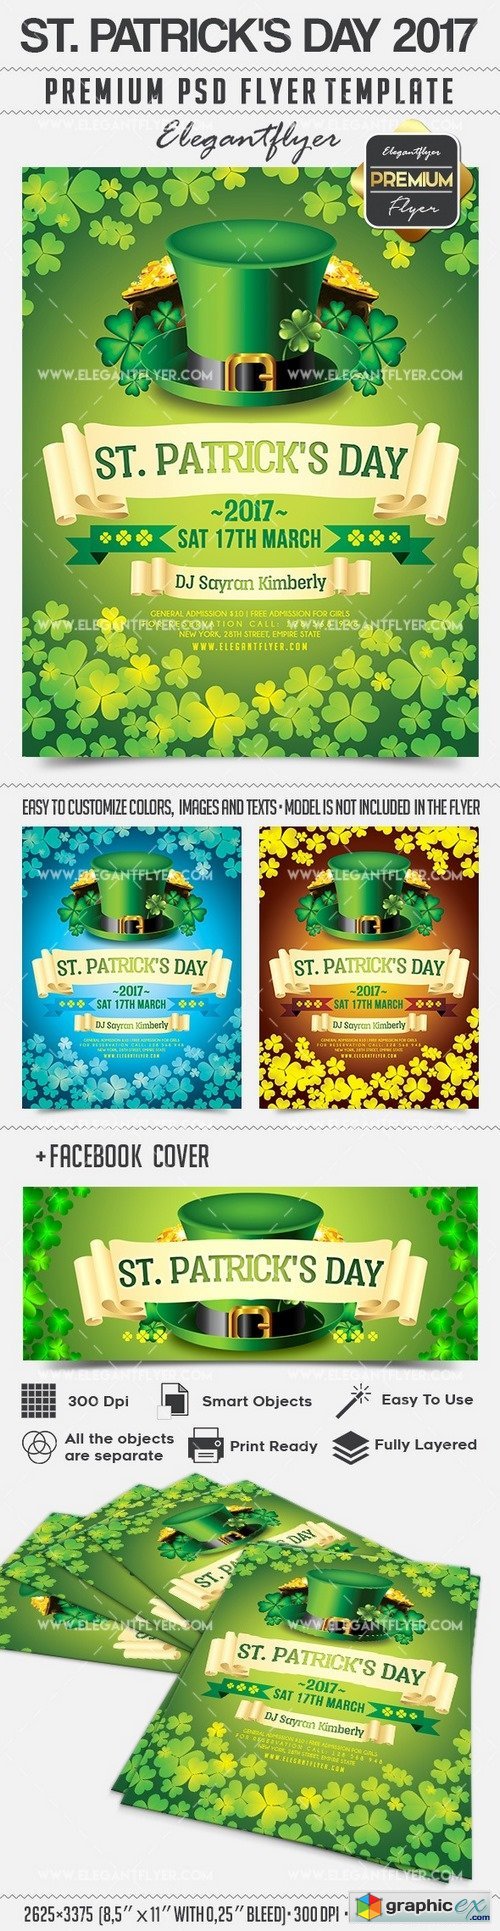 St. Patricks Day 2017  Flyer PSD Template + Facebook Cover